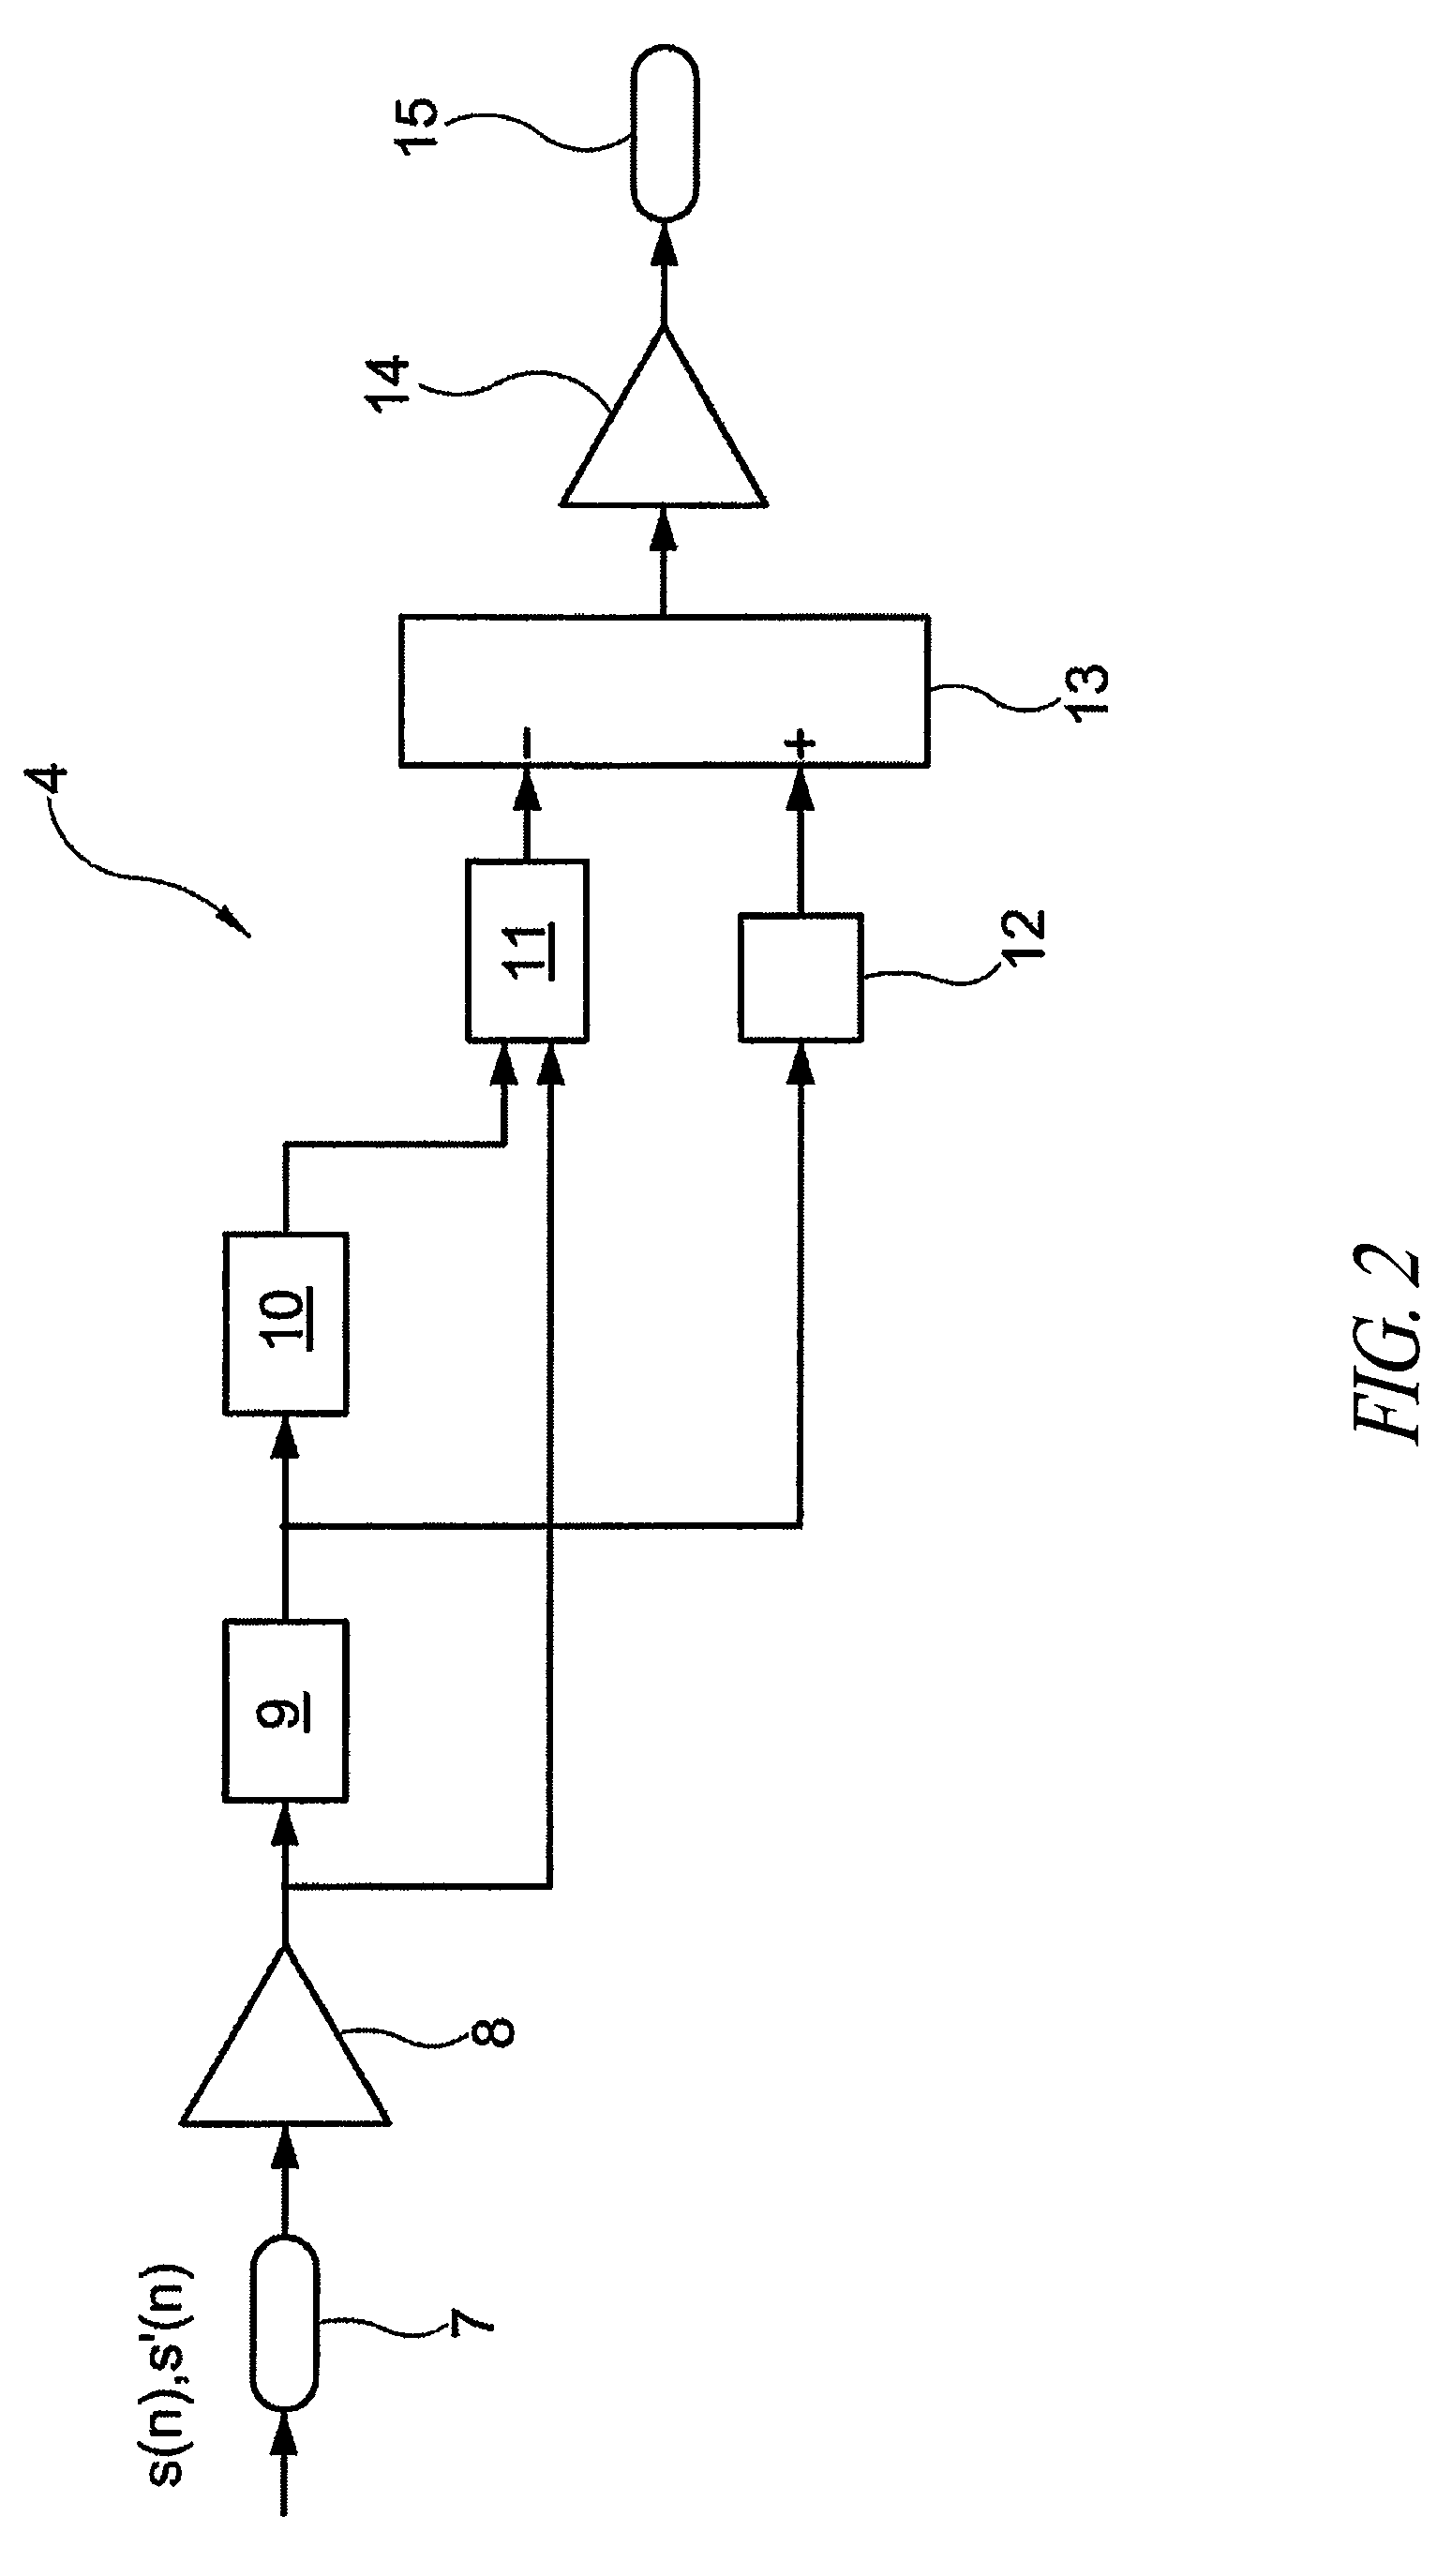 Method and apparatus for suppressing adjacent channel interference and multipath propagation signals and radio receiver using said apparatus